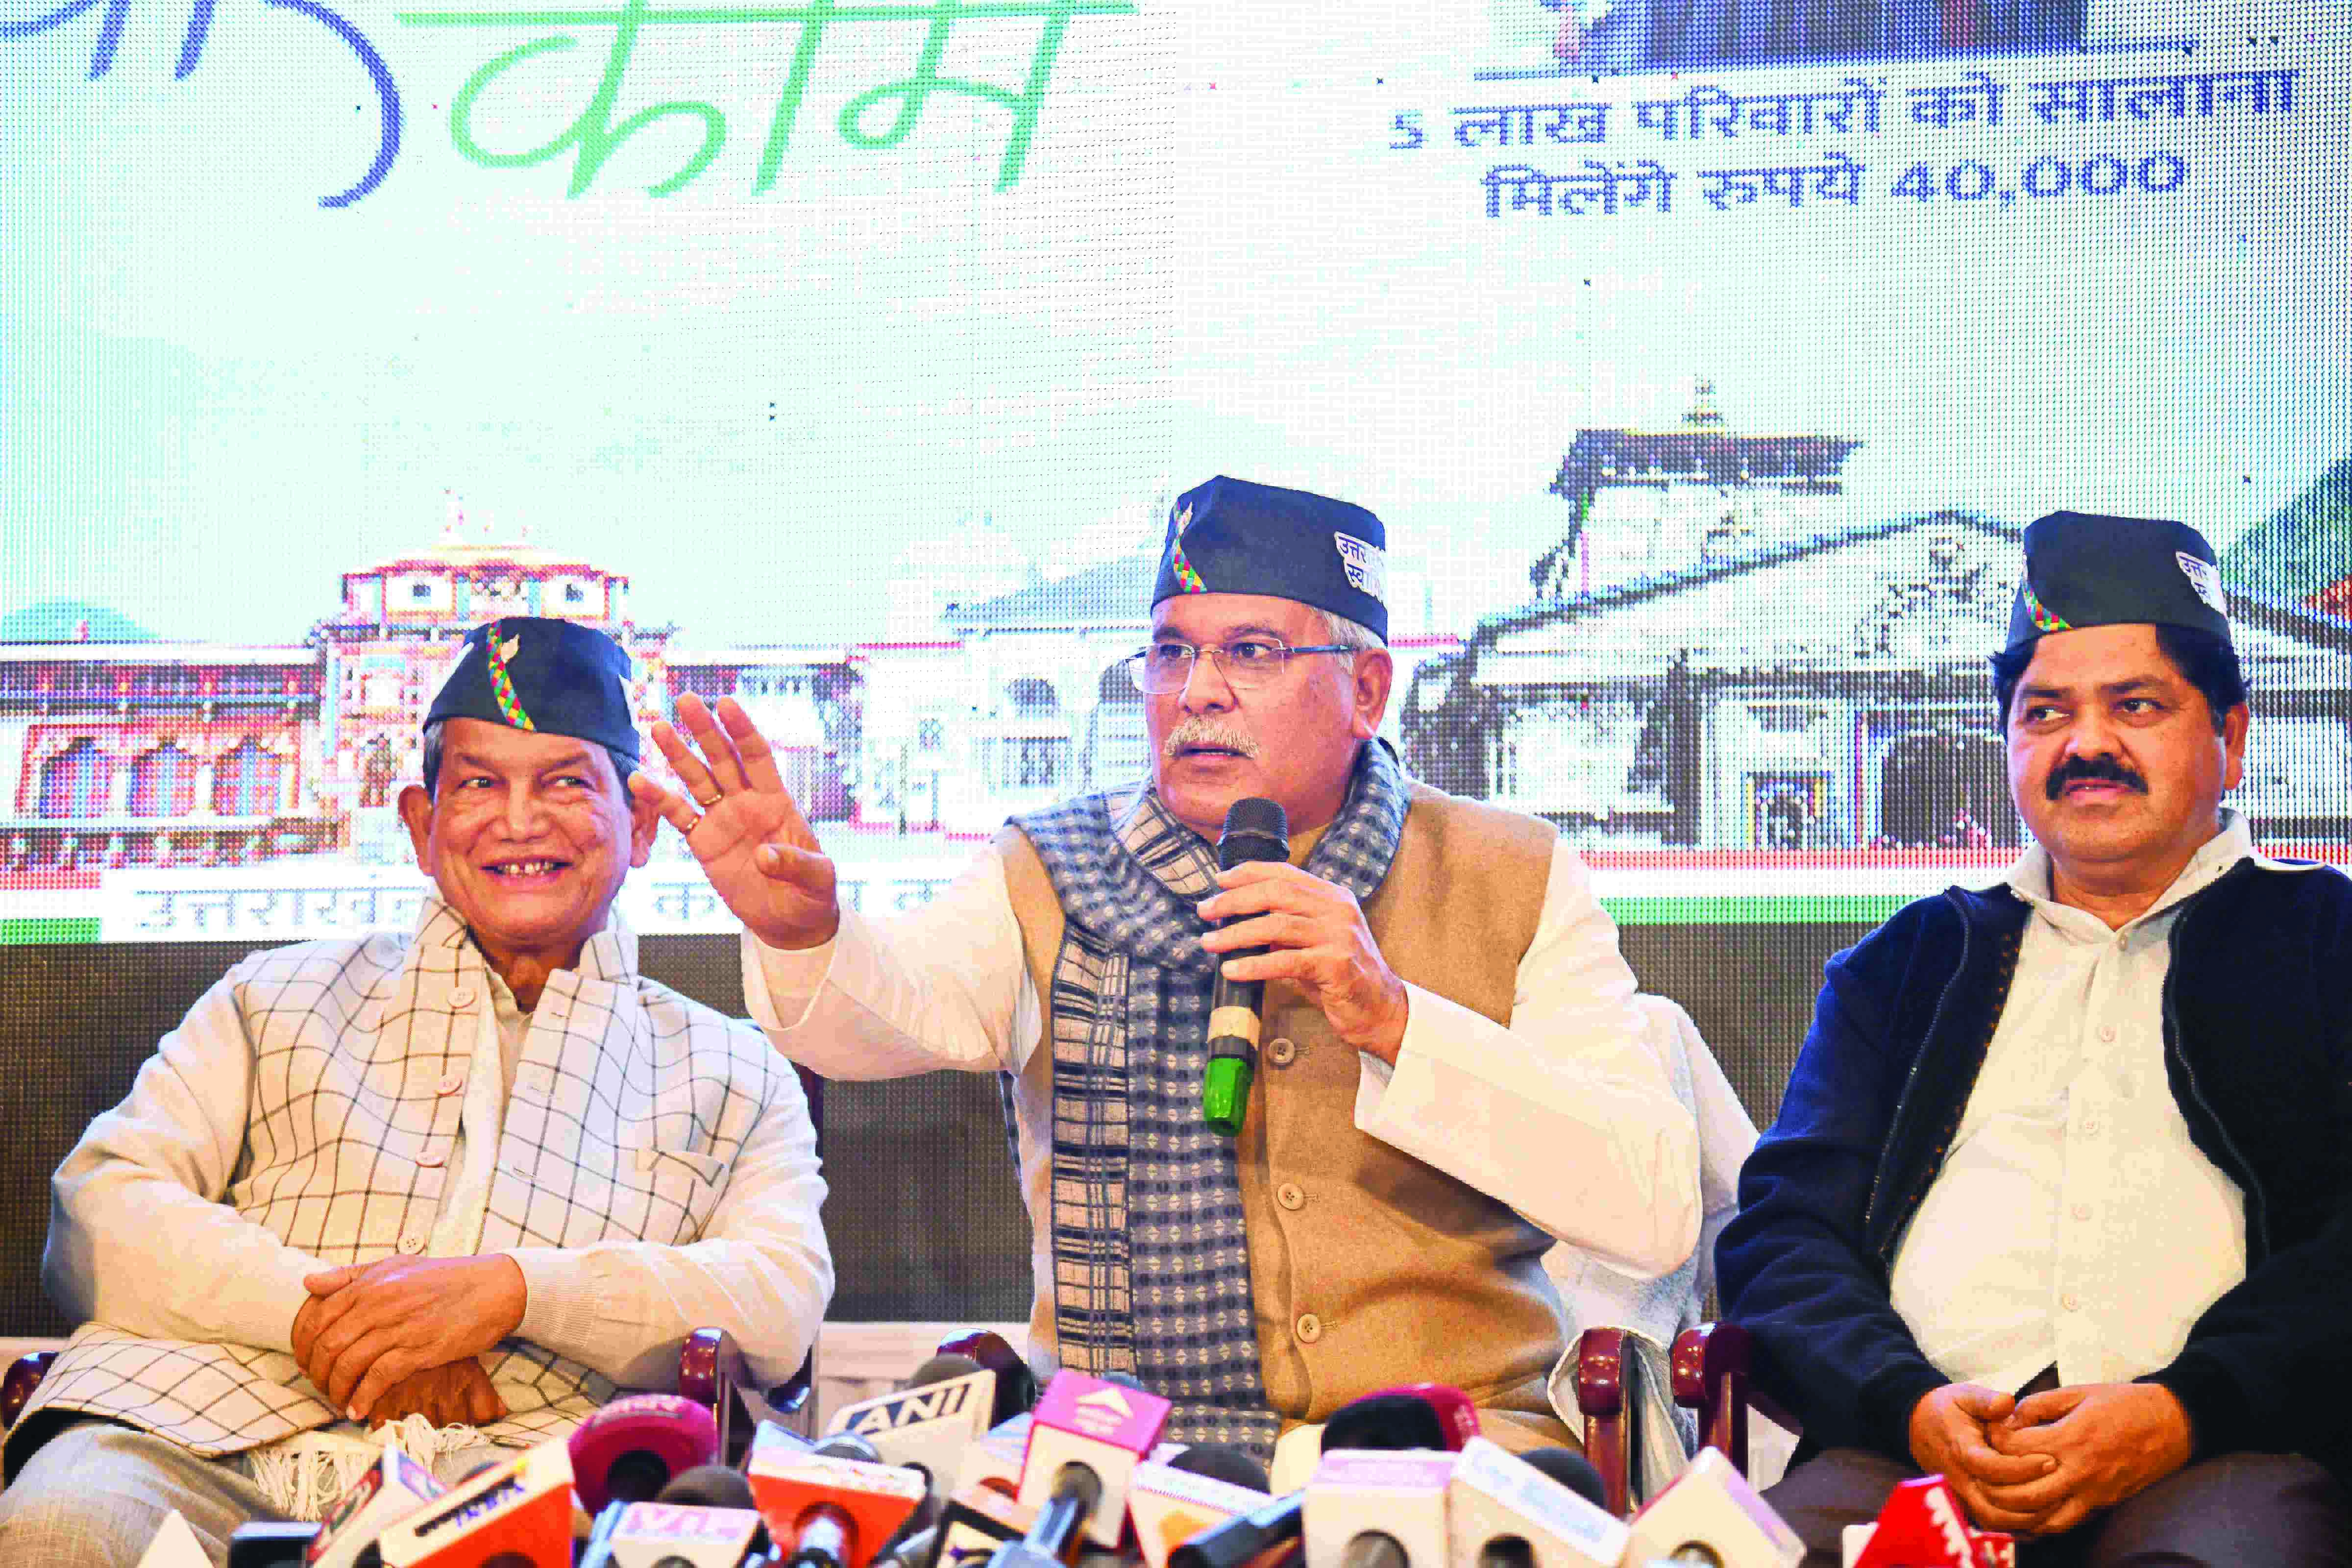 Ukhand: Cong promises relief to 5 lakh families